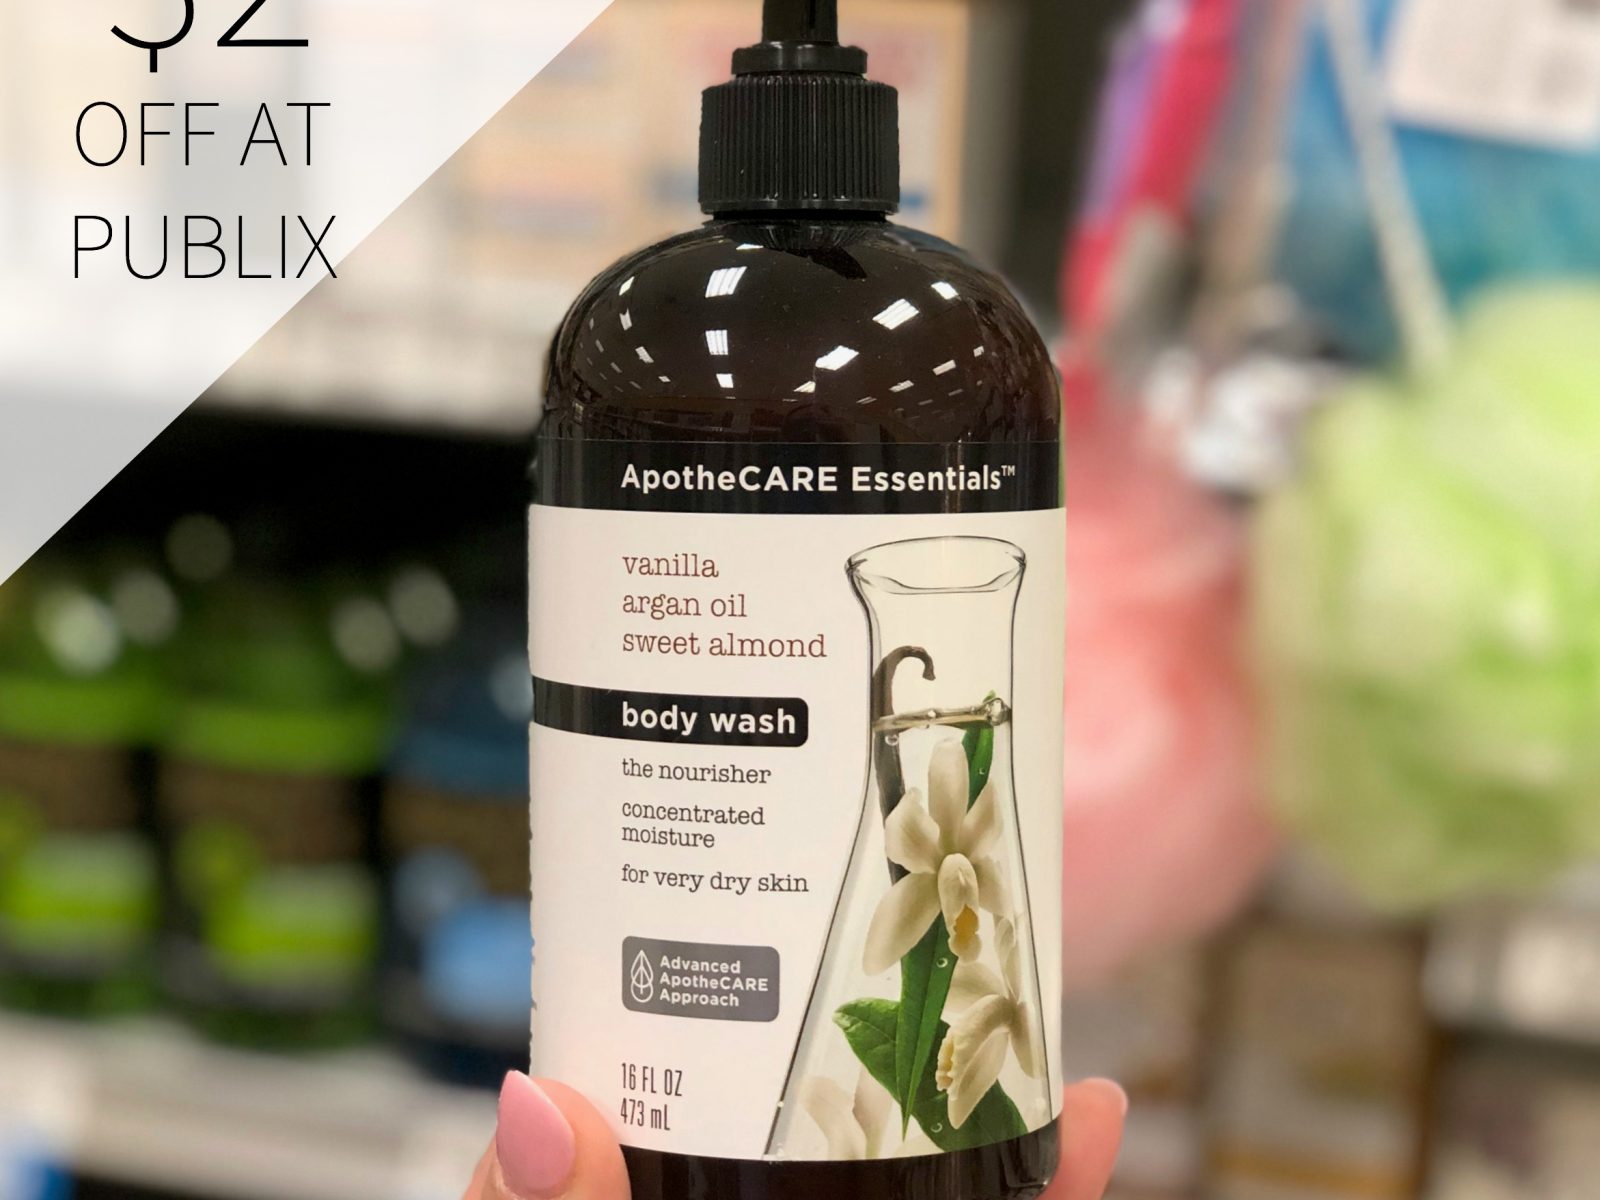 Save $2 On ApotheCARE “The Soother” Body Wash At Your Local Publix